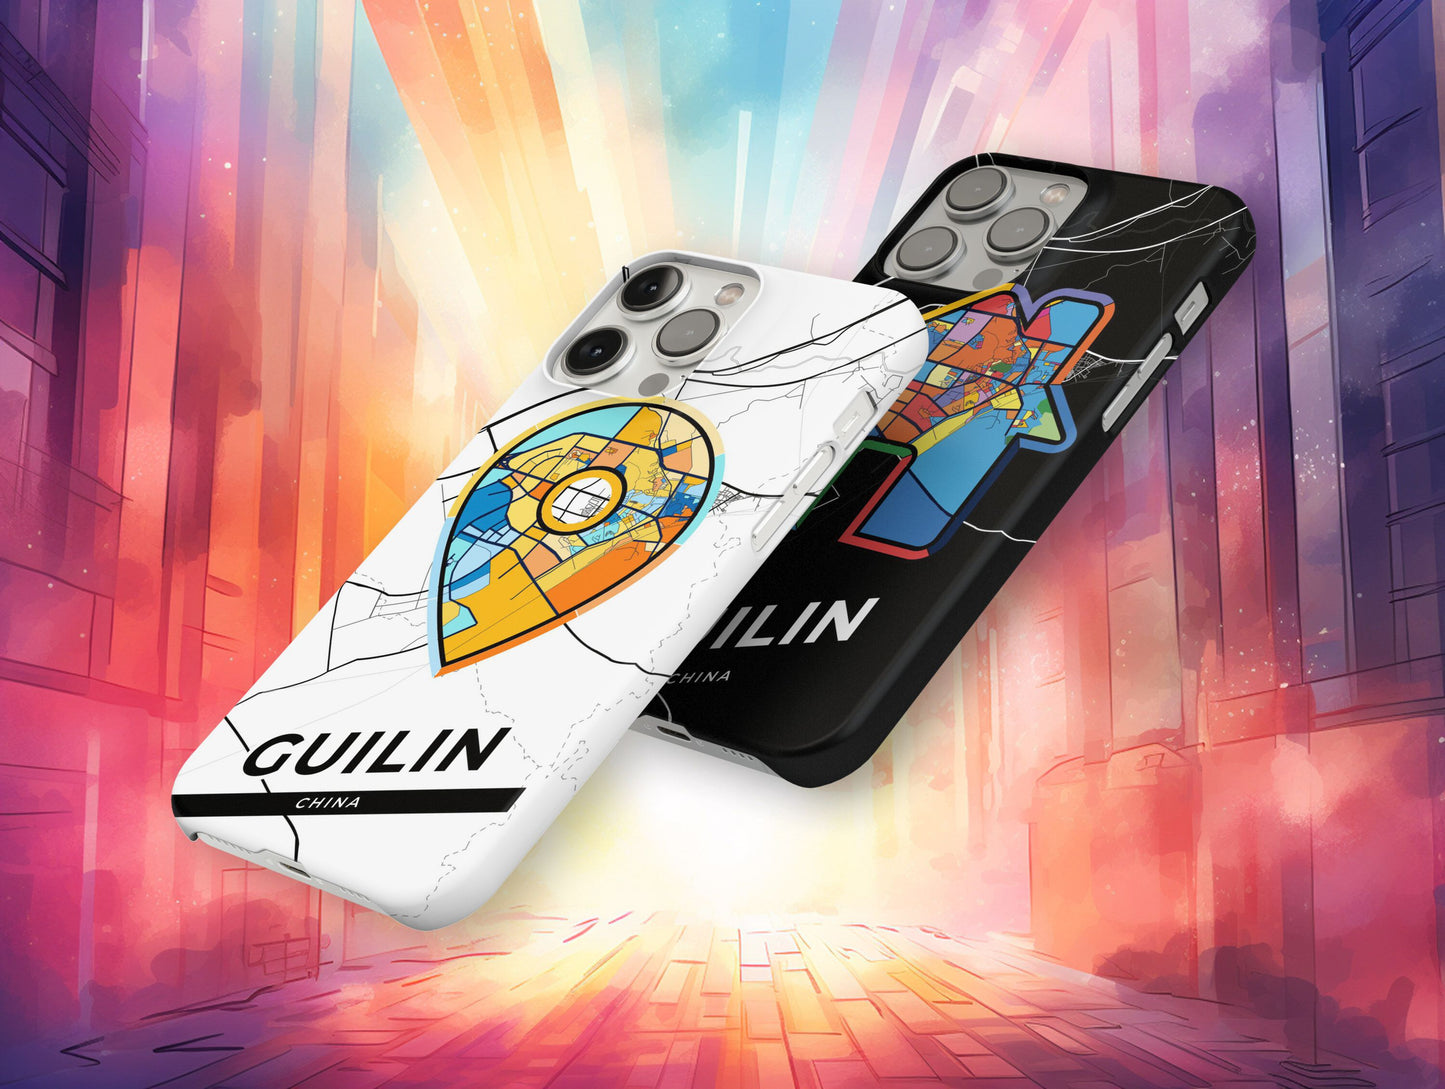 Guilin China slim phone case with colorful icon. Birthday, wedding or housewarming gift. Couple match cases.